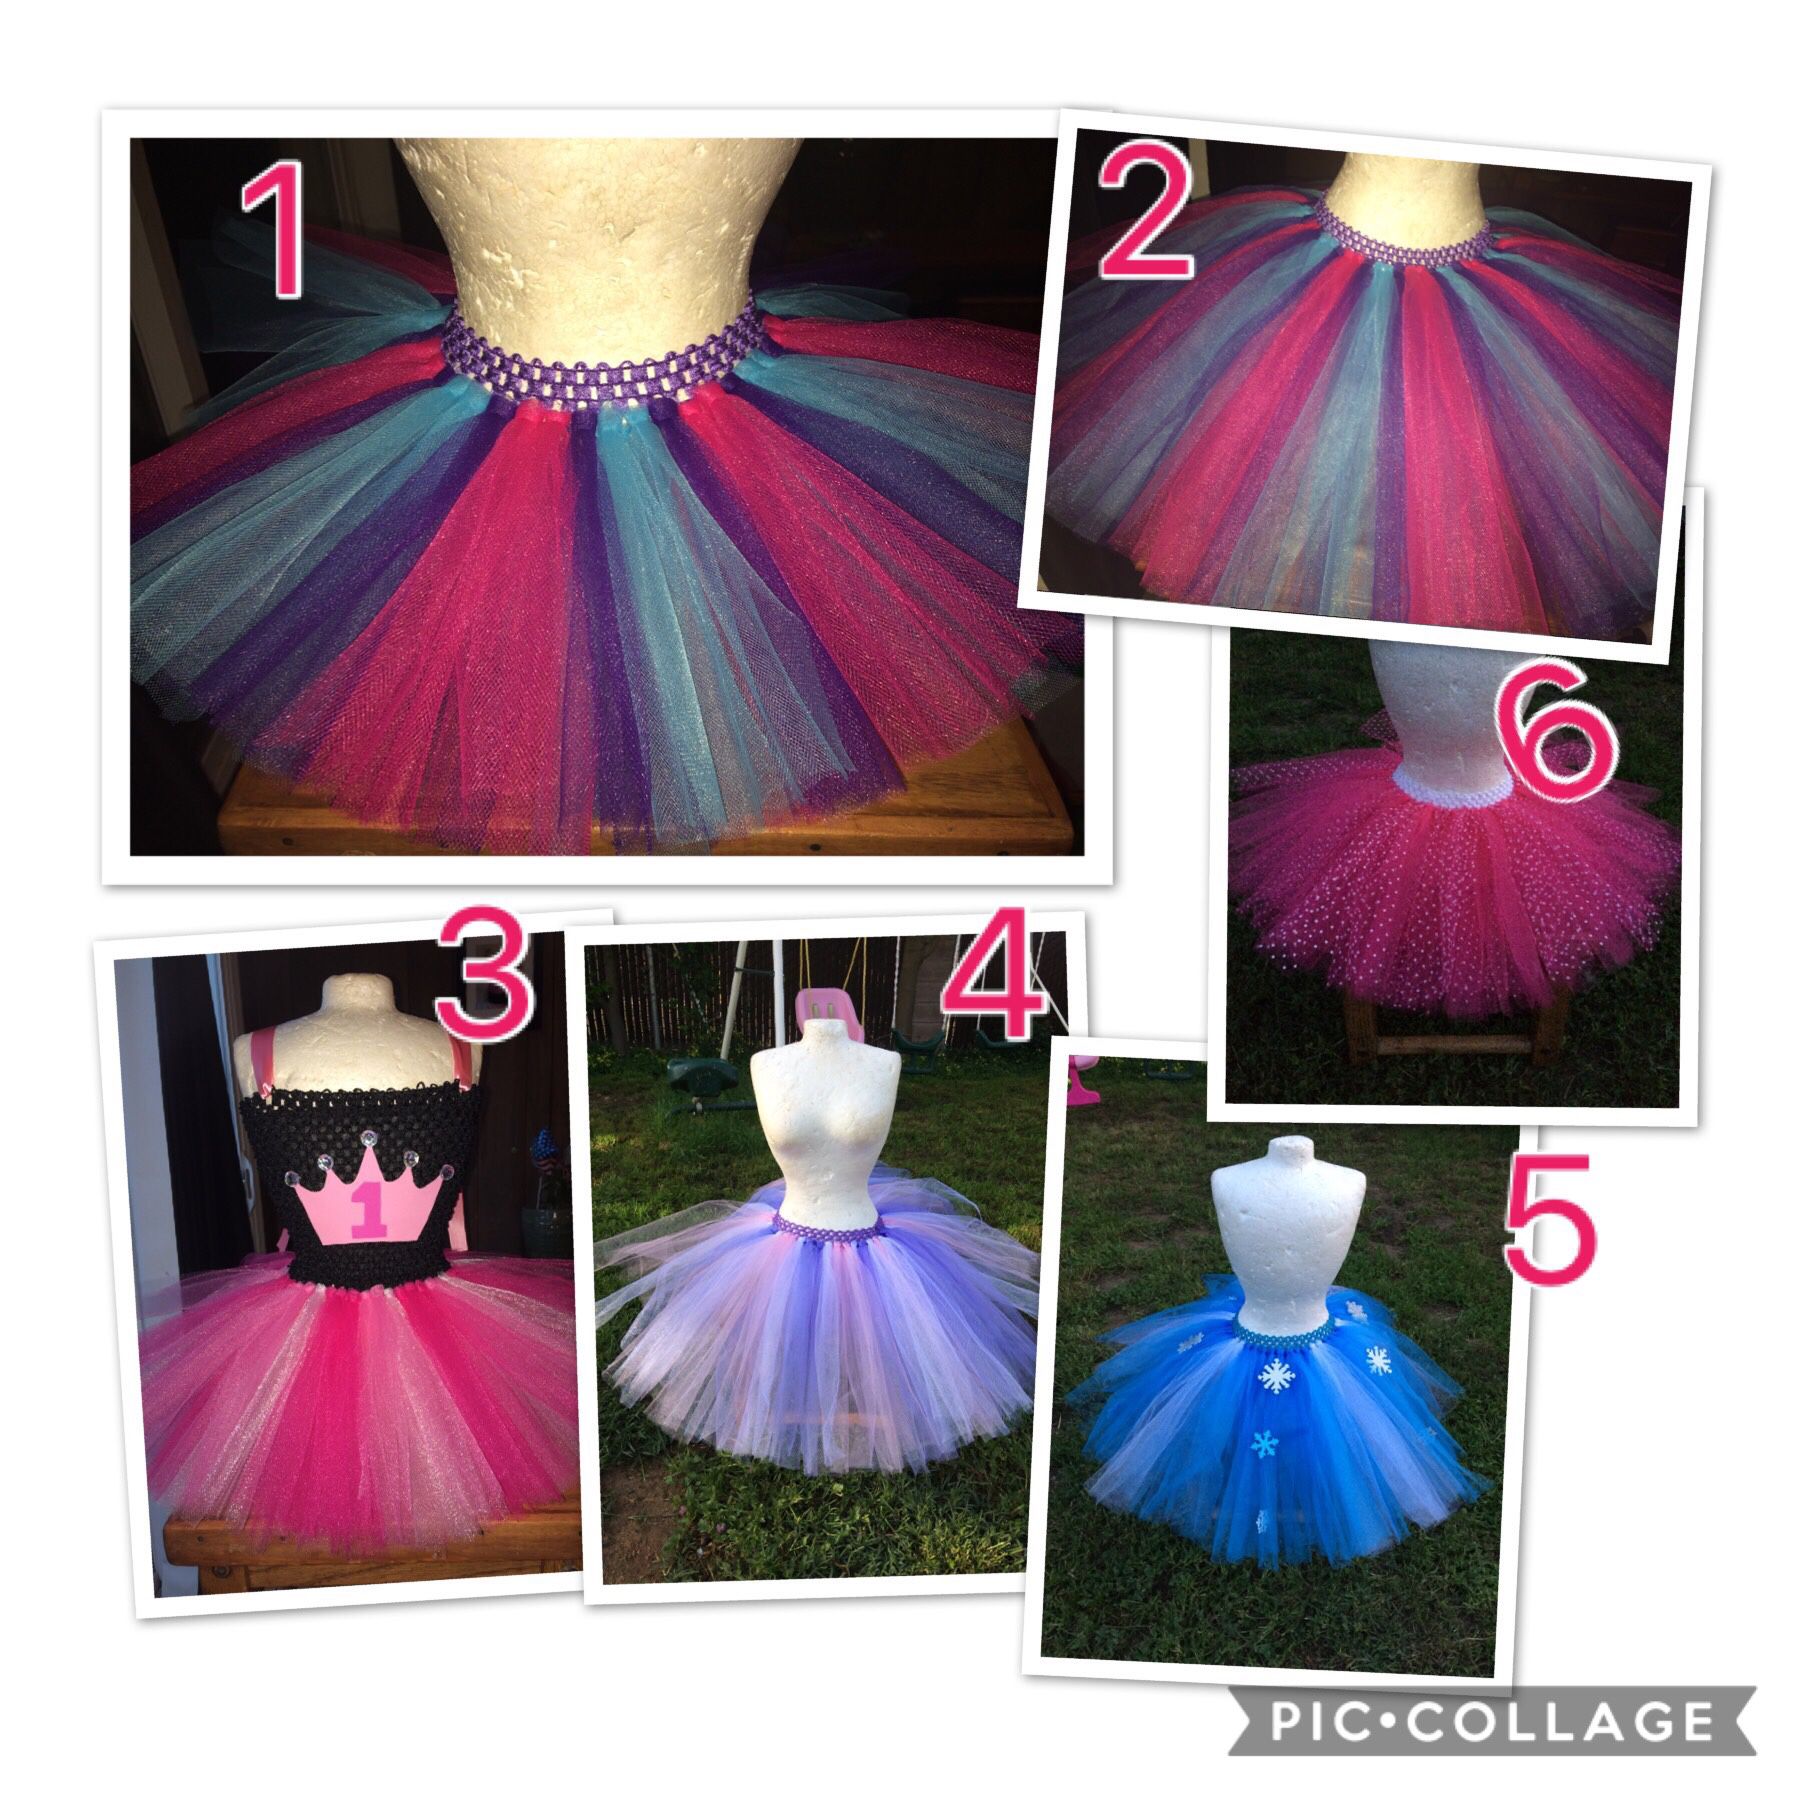 6 tutus ready for pu now